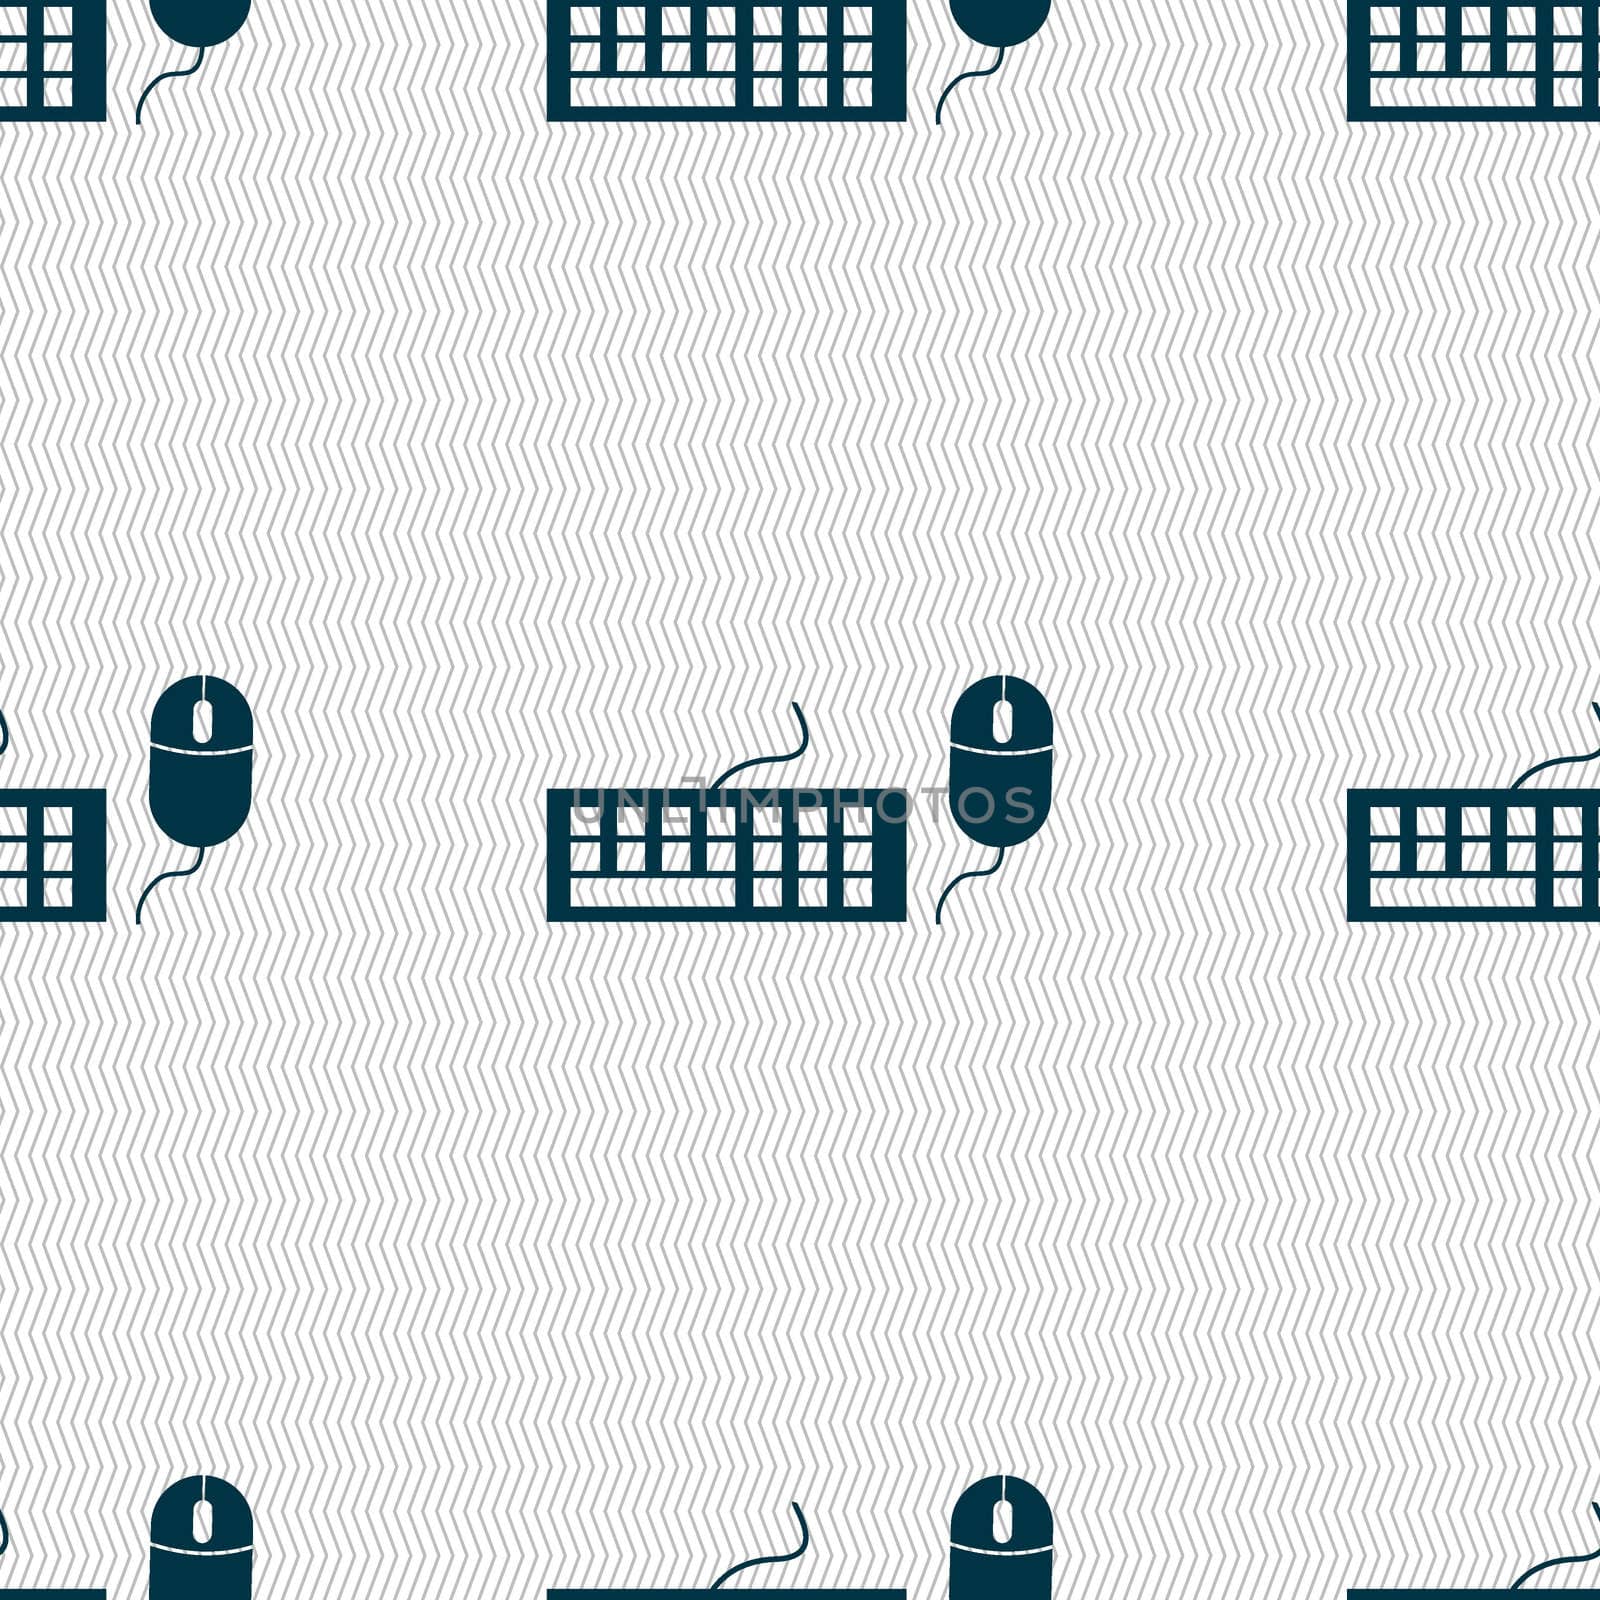 Computer keyboard and mouse Icon. Seamless abstract background with geometric shapes. illustration